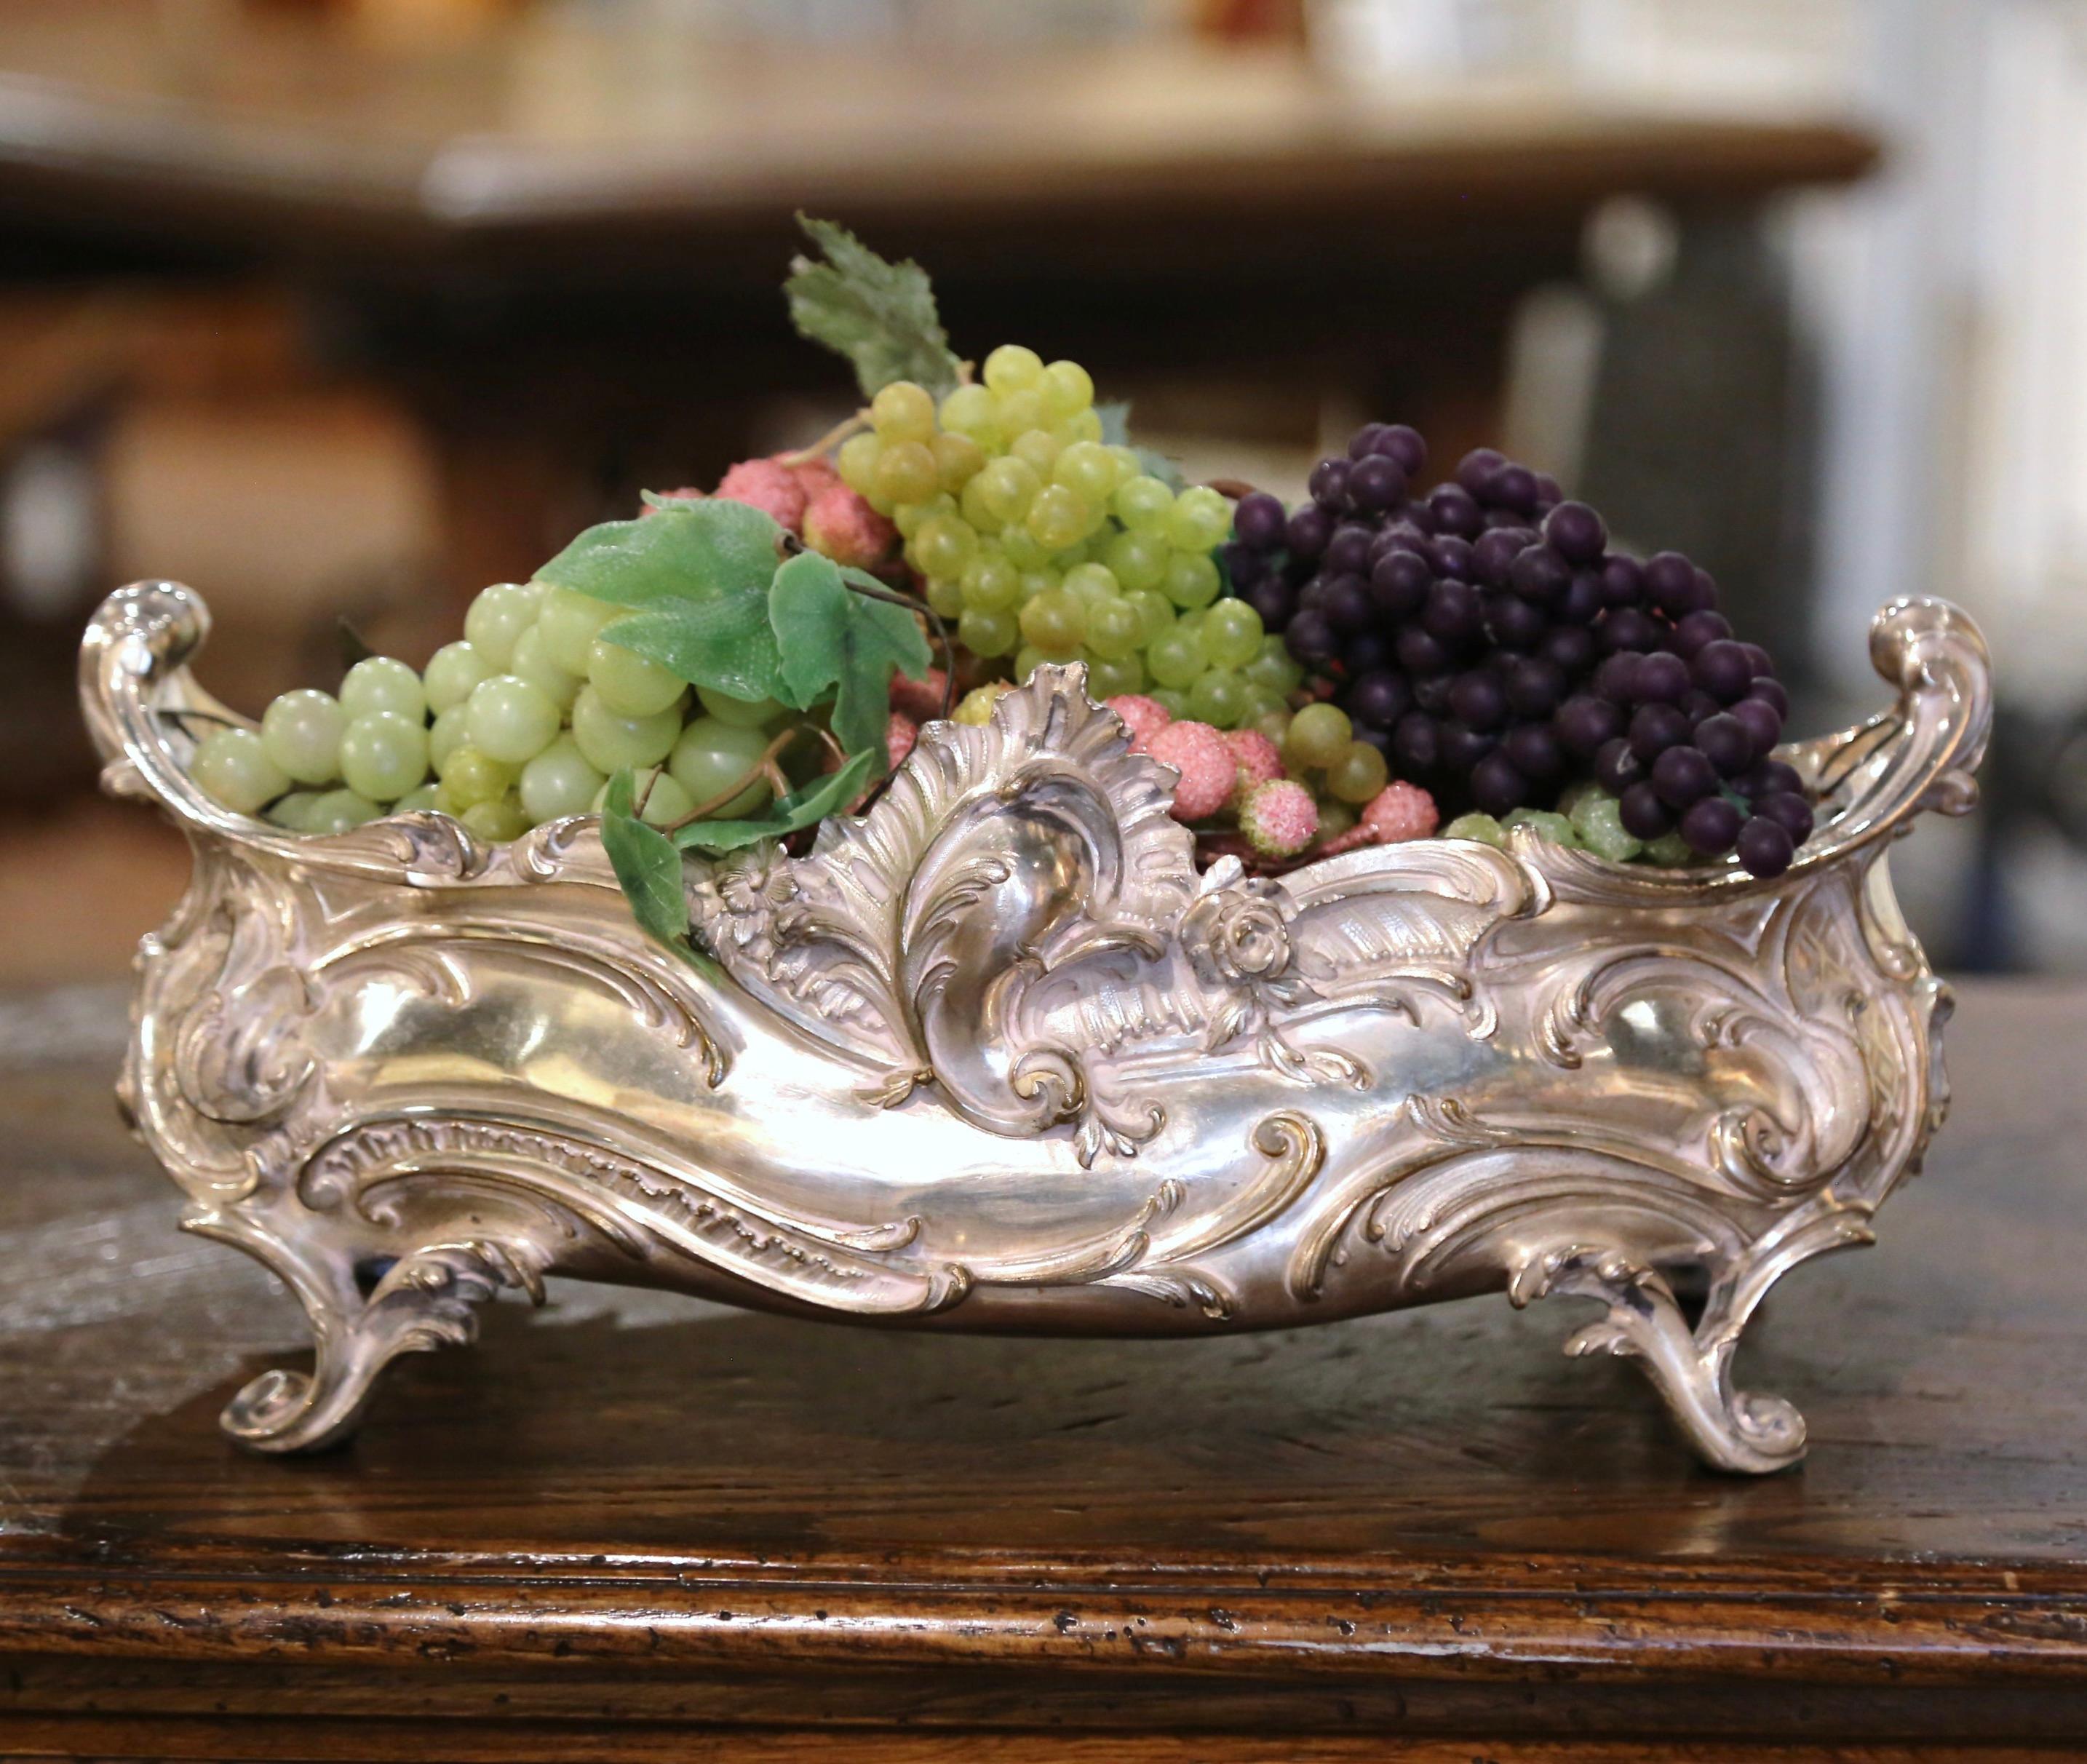 This elegant bronze silver plated jardinière was created in Paris, France, circa 1870. The oblong antique planter sits on small curved feet and leaves, over a scalloped apron decorated with acanthus leaf motifs; it is further embellished with a